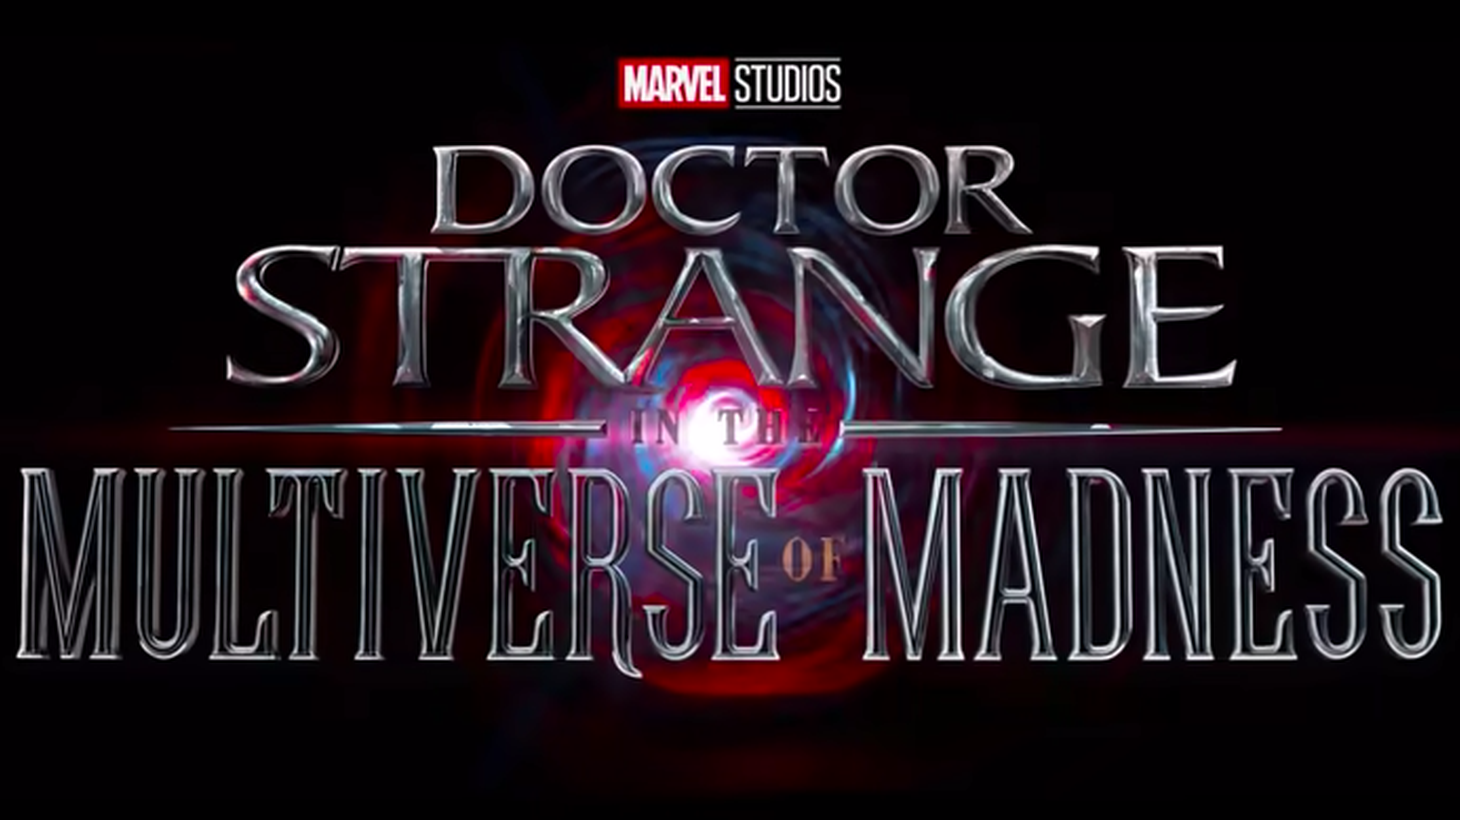 “Doctor Strange in the Multiverse of Madness” stars Benedict Cumberbatch, Chiwetel Ejiofor, Benedict Wong, and Xochitl Gomez. It’s directed by Sam Raimi.